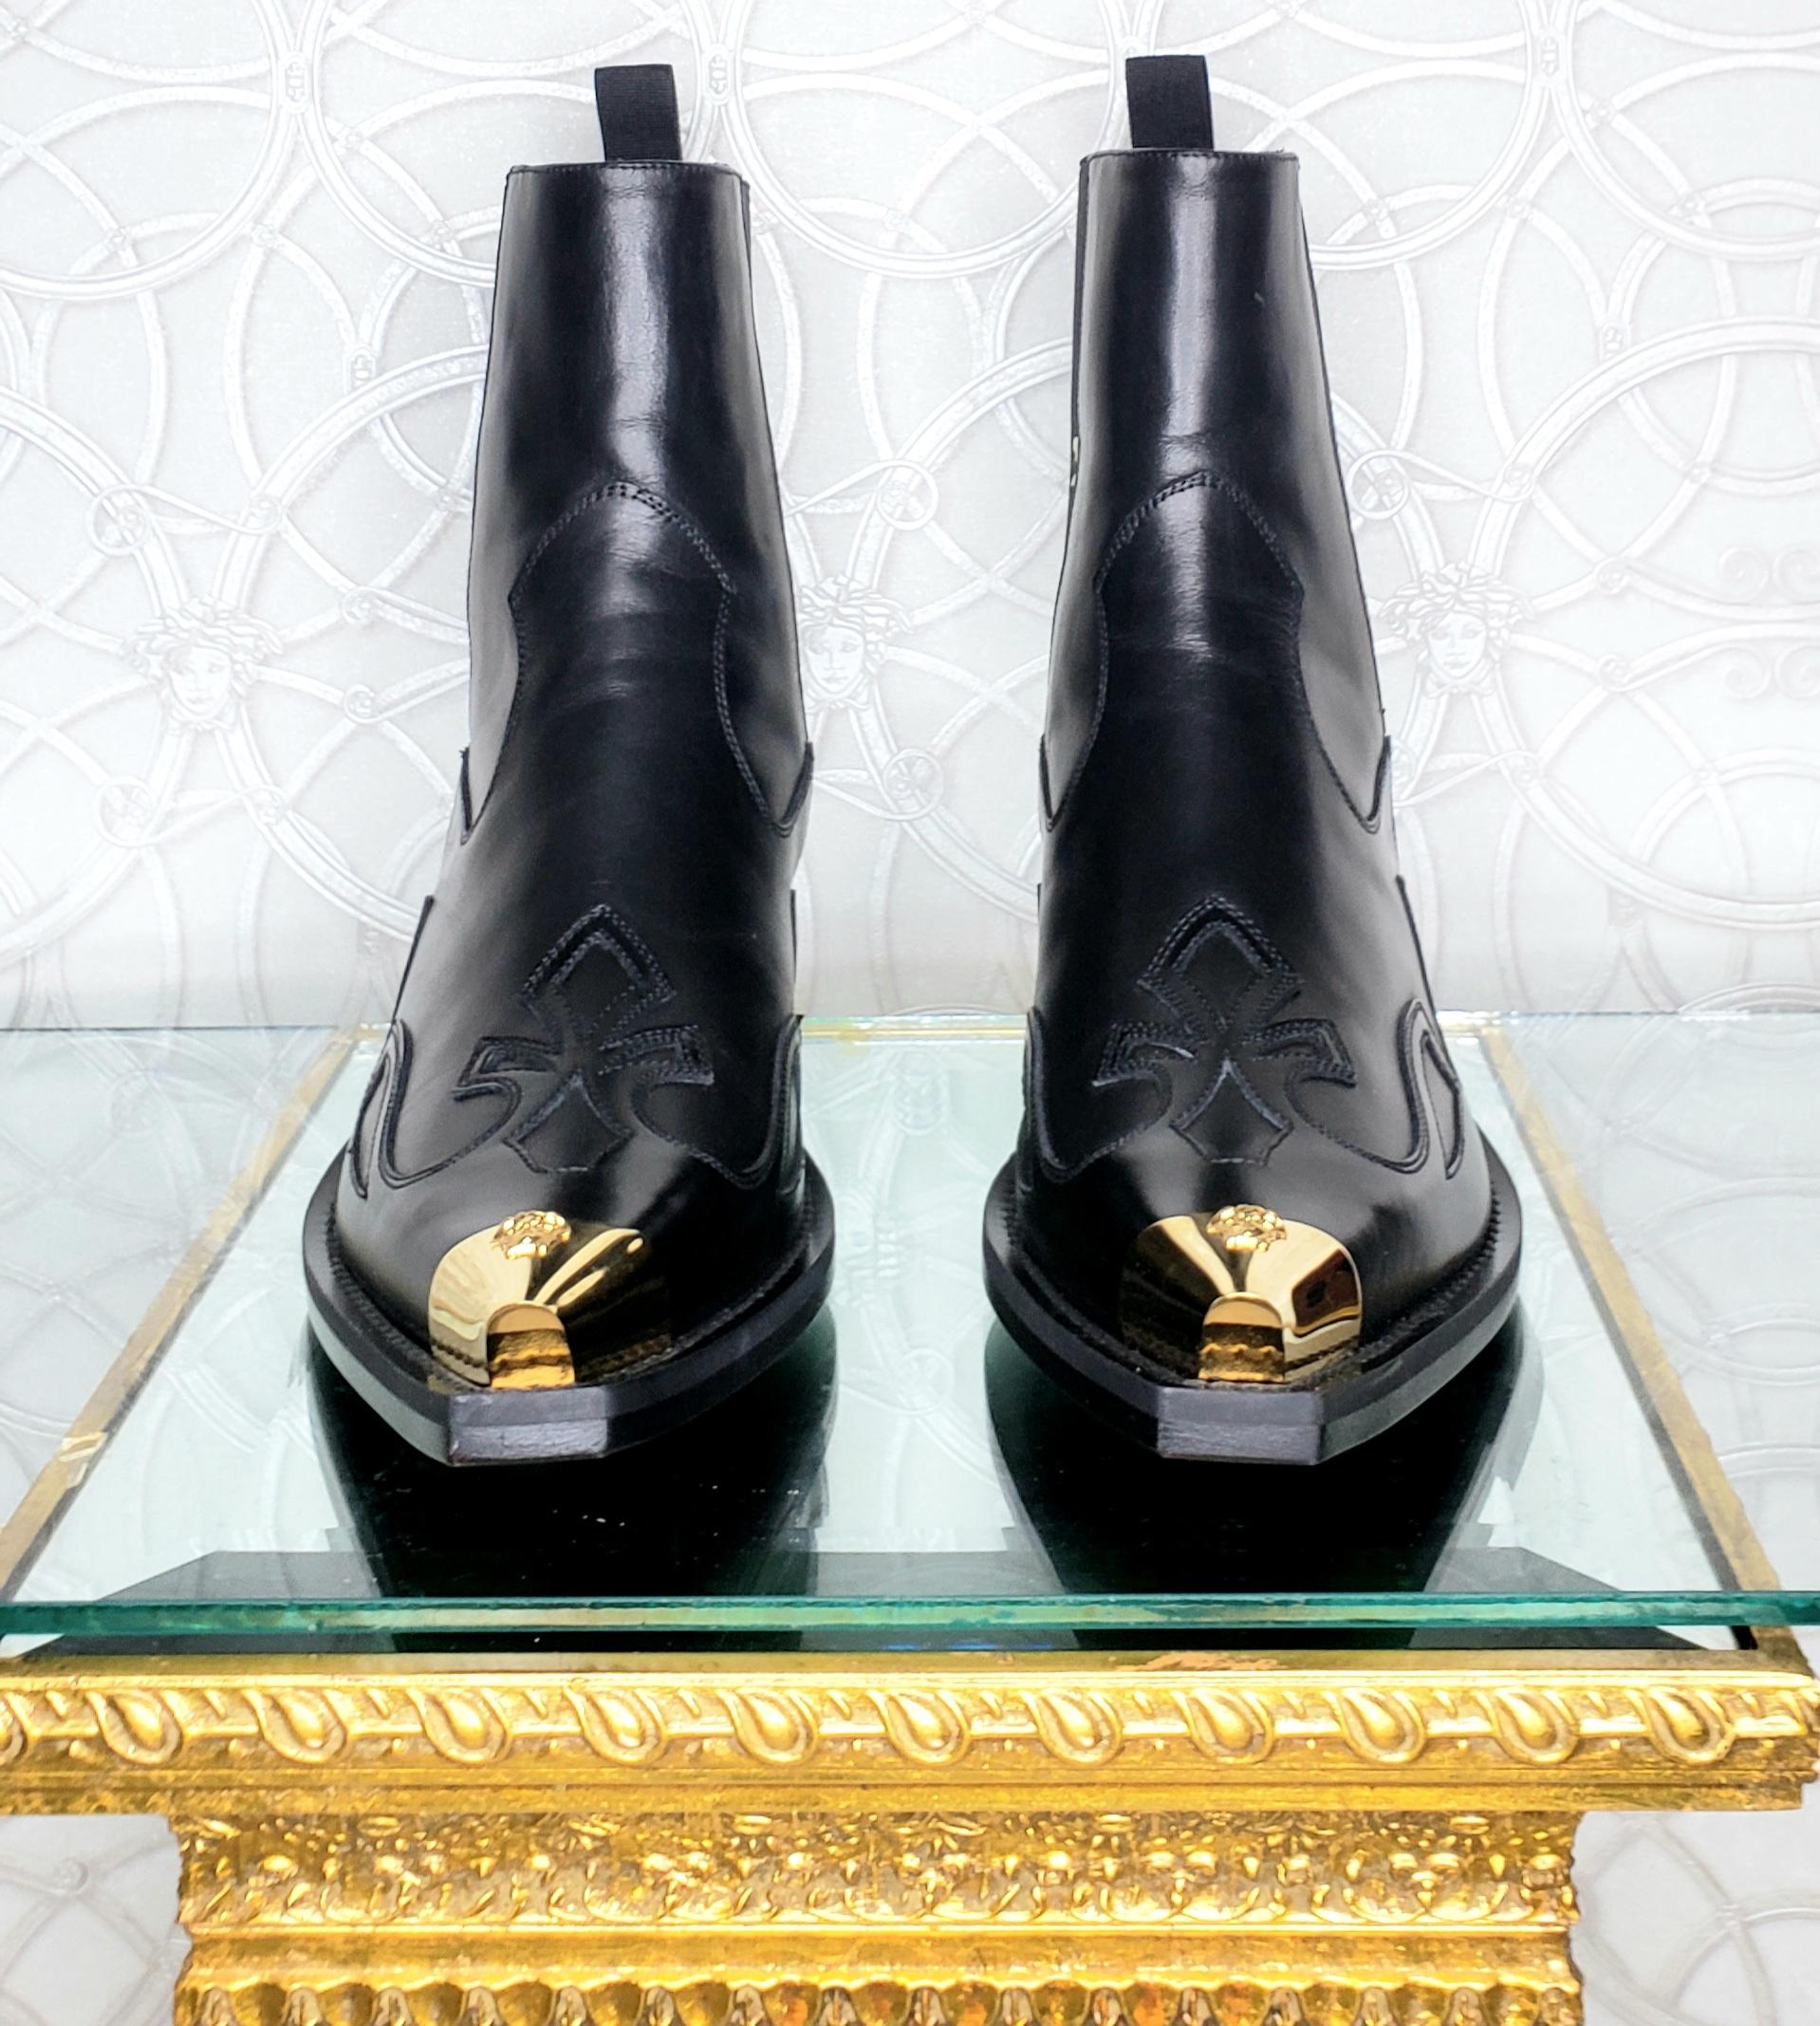 VERSACE GOTHIC SIGNS 24k GOLD PLATED MEDUSA TIPS BLACK LEATHER BOOTS 40.5 - 7.5 1